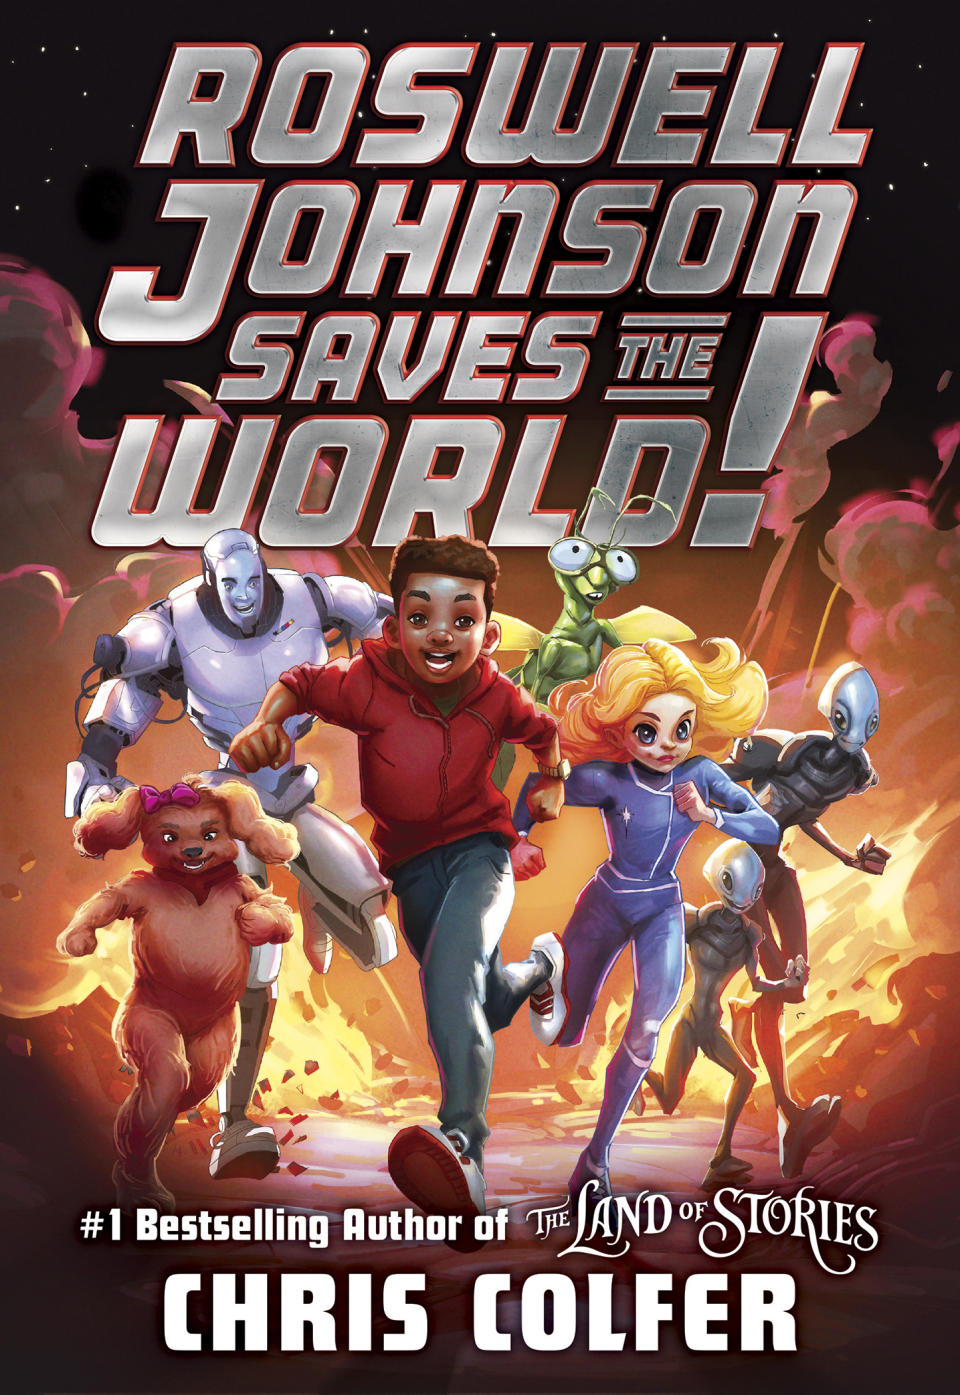 This cover image released by Little, Brown Books for Young Readers shows "Roswell Johnson Saves the World" by Chris Colfer, releasing on June 4. (Little, Brown Books for Young Readers via AP)